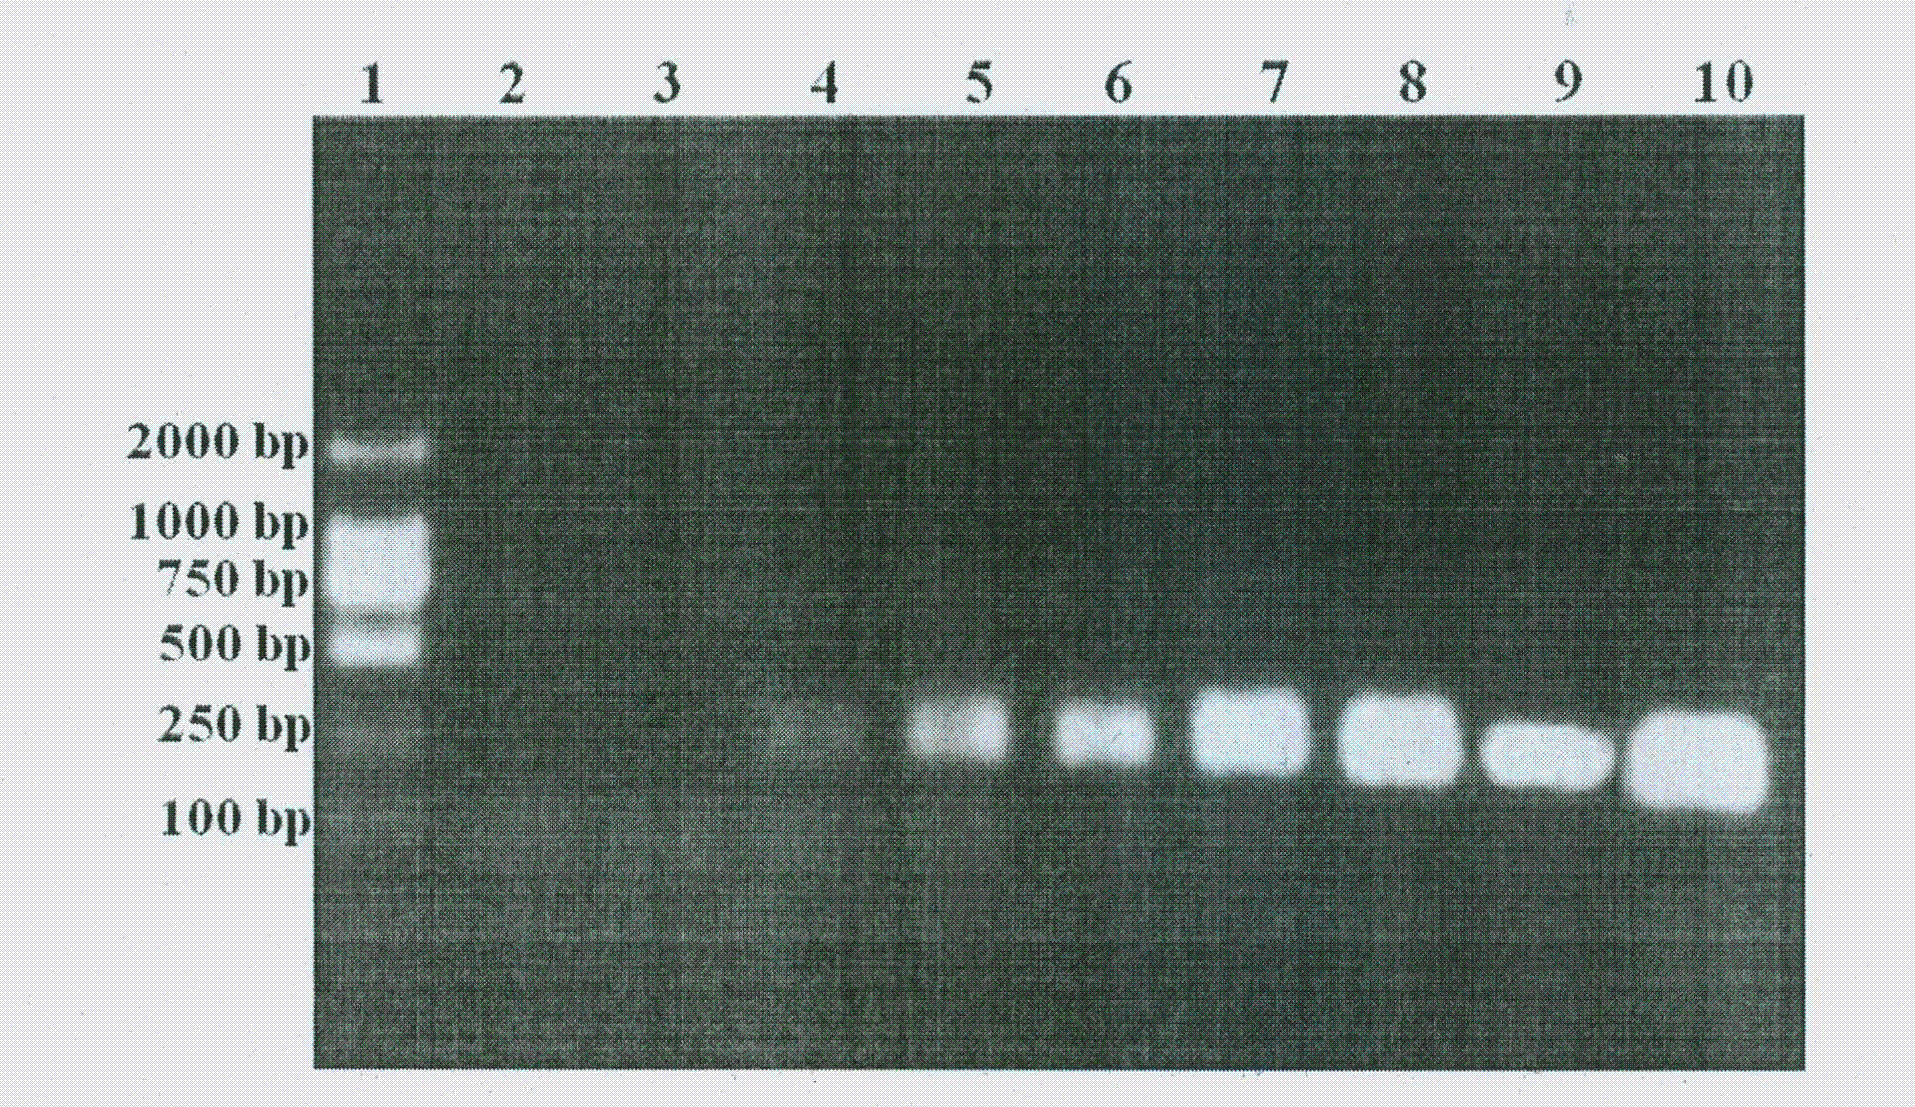 Specific nucleic acid identification sequence used for detecting proteus mirabilis, and application thereof